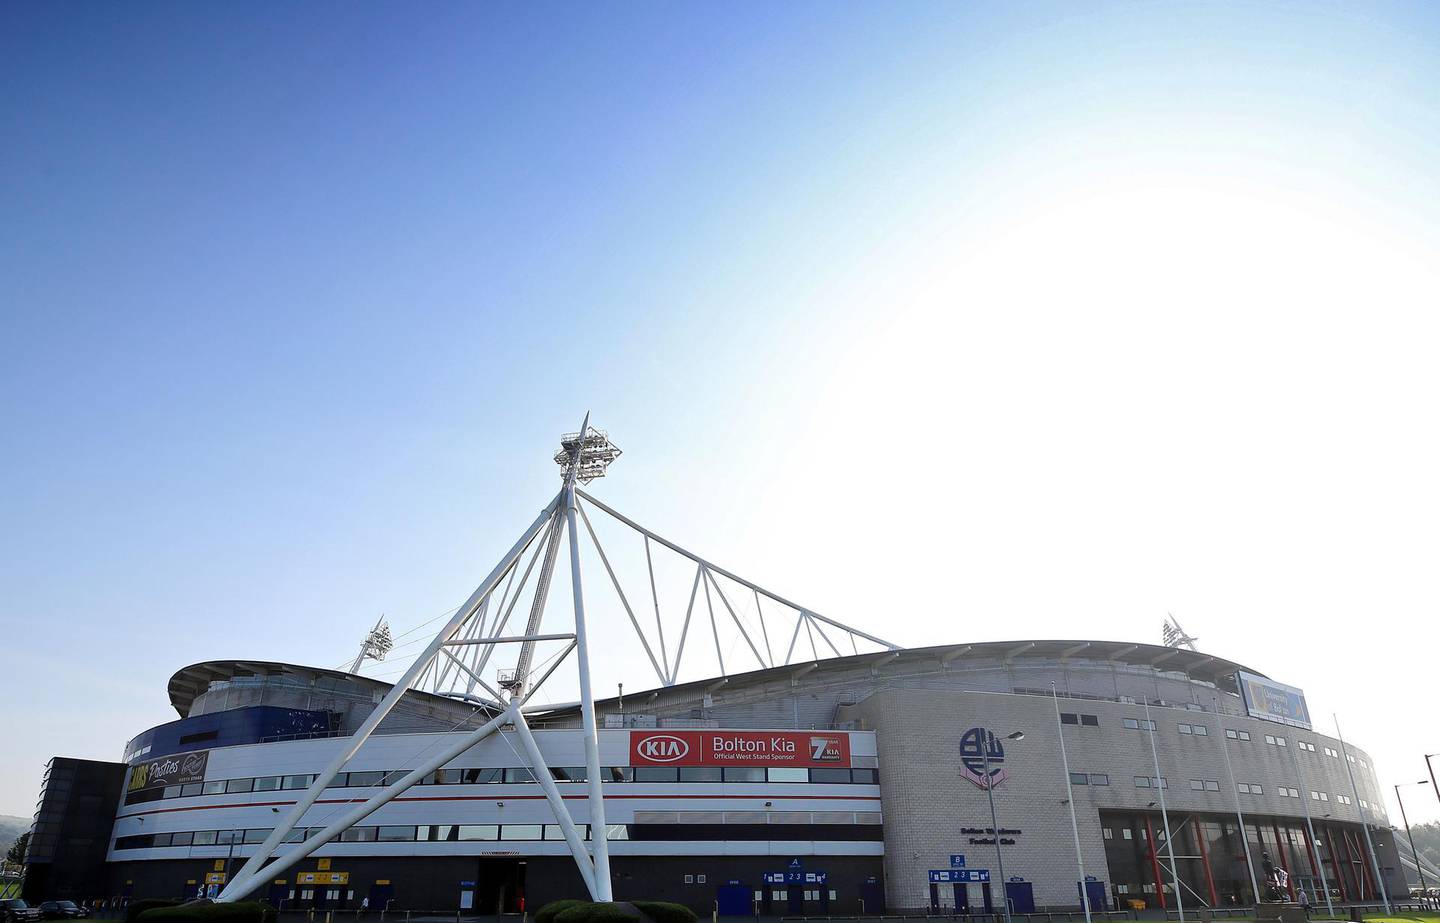 File photo dated 27-08-2019 of a general exterior view at the University of Bolton Stadium, Bolton. PRESS ASSOCIATION Photo. Issue date: Wednesday August 28, 2019. Bolton have been sold to Football Ventures (Whites) Limited, the club’s administrators have announced. See PA story SOCCER Bolton. Photo credit should read Peter Byrne/PA Wire.